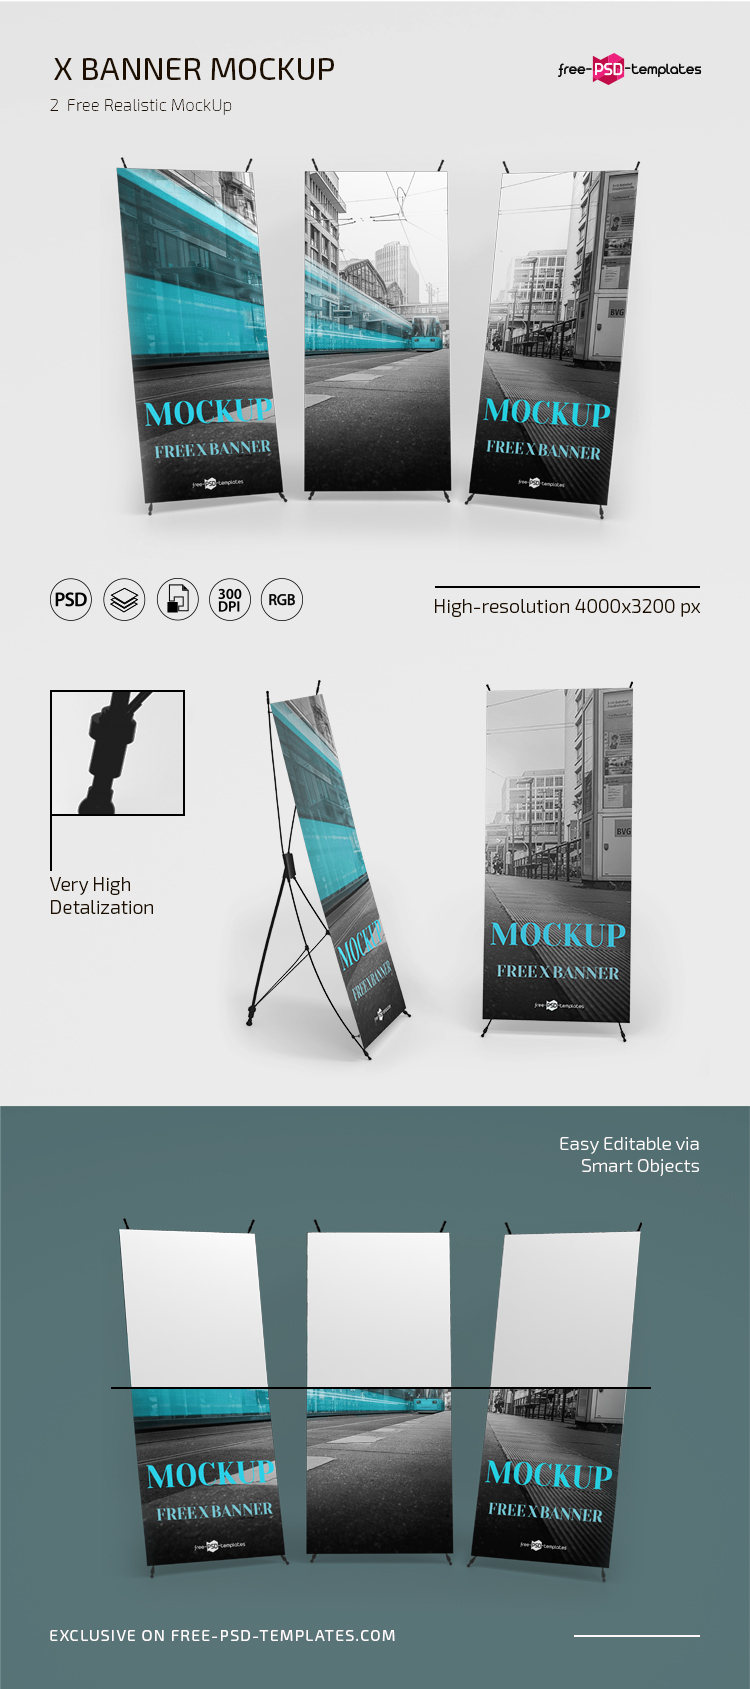 The 20 Best Banner Mockup Templates For Photoshop